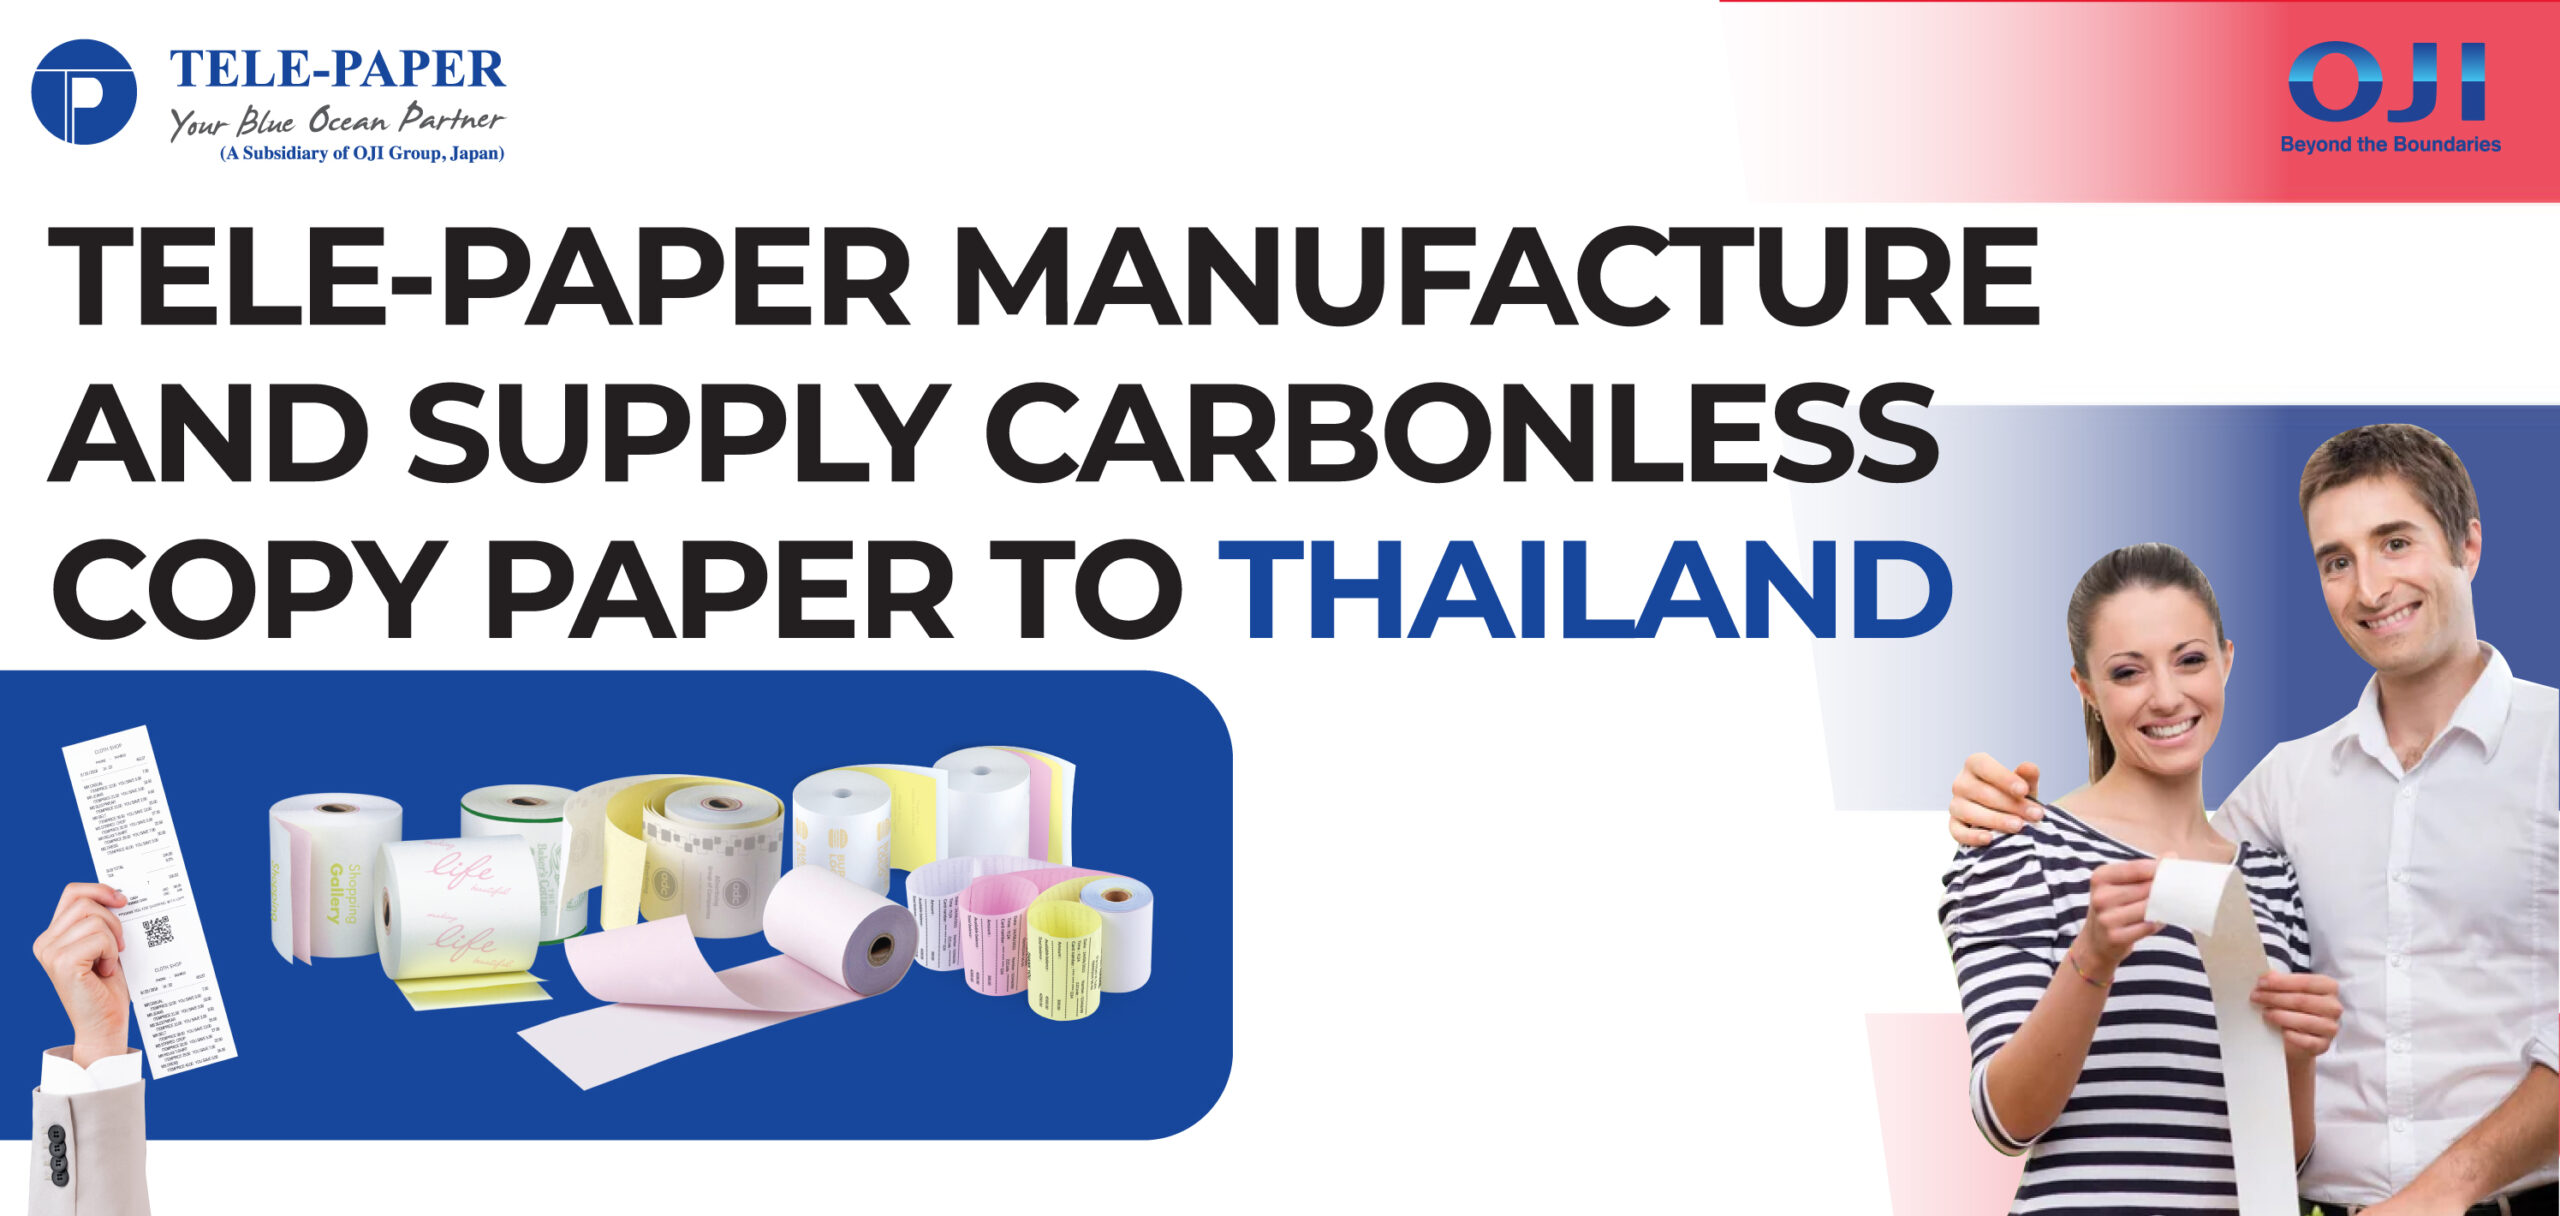 Supplying carbonless copy paper to Thailand